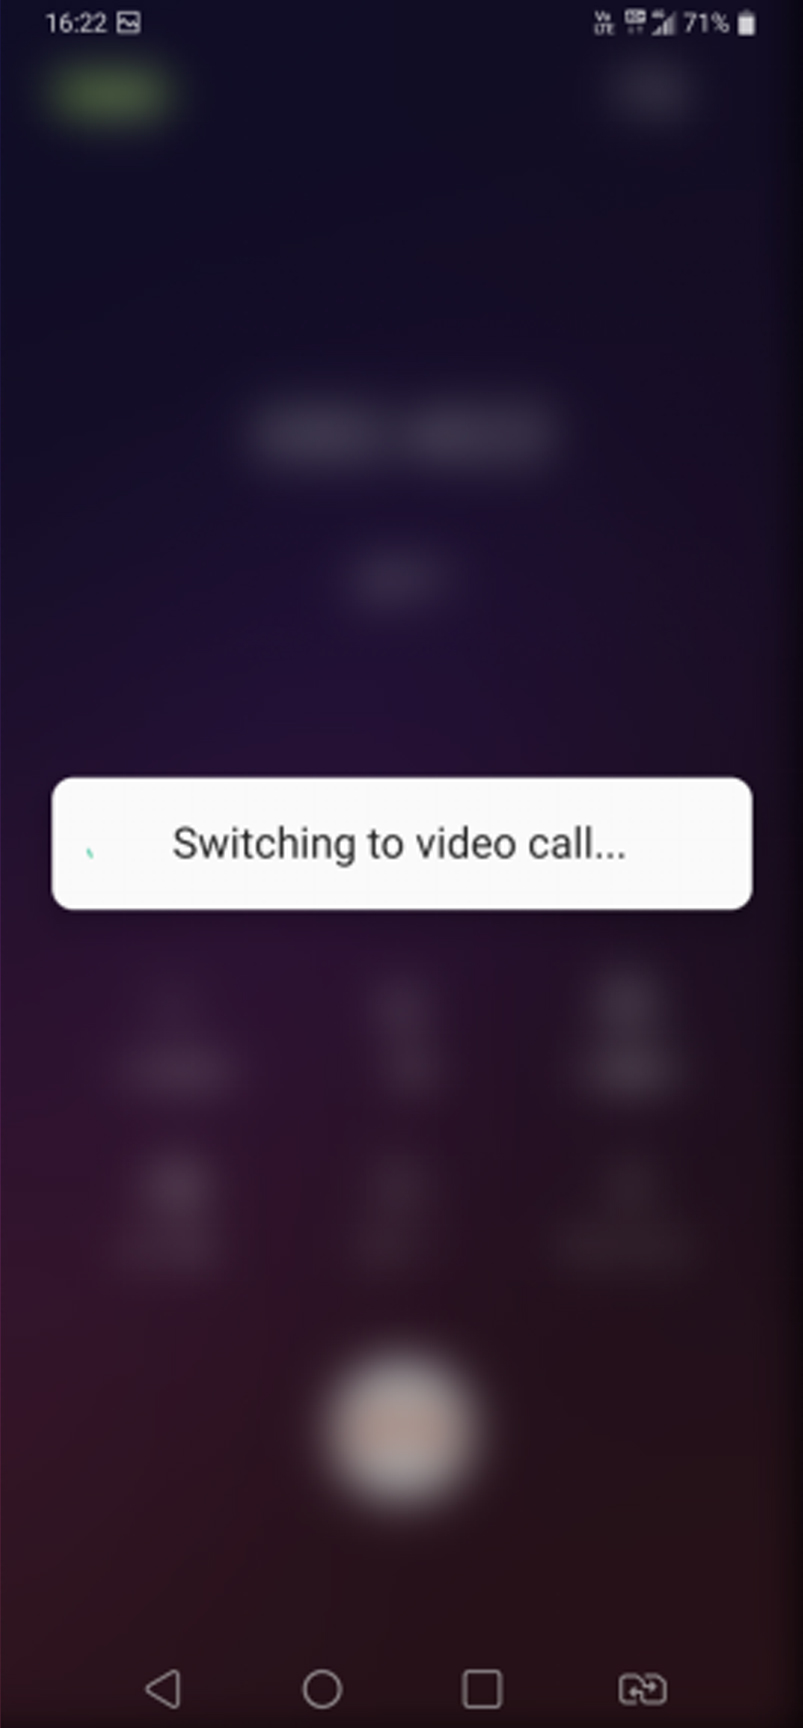 Switch between voice and video call by pushing the button on the top right corner.